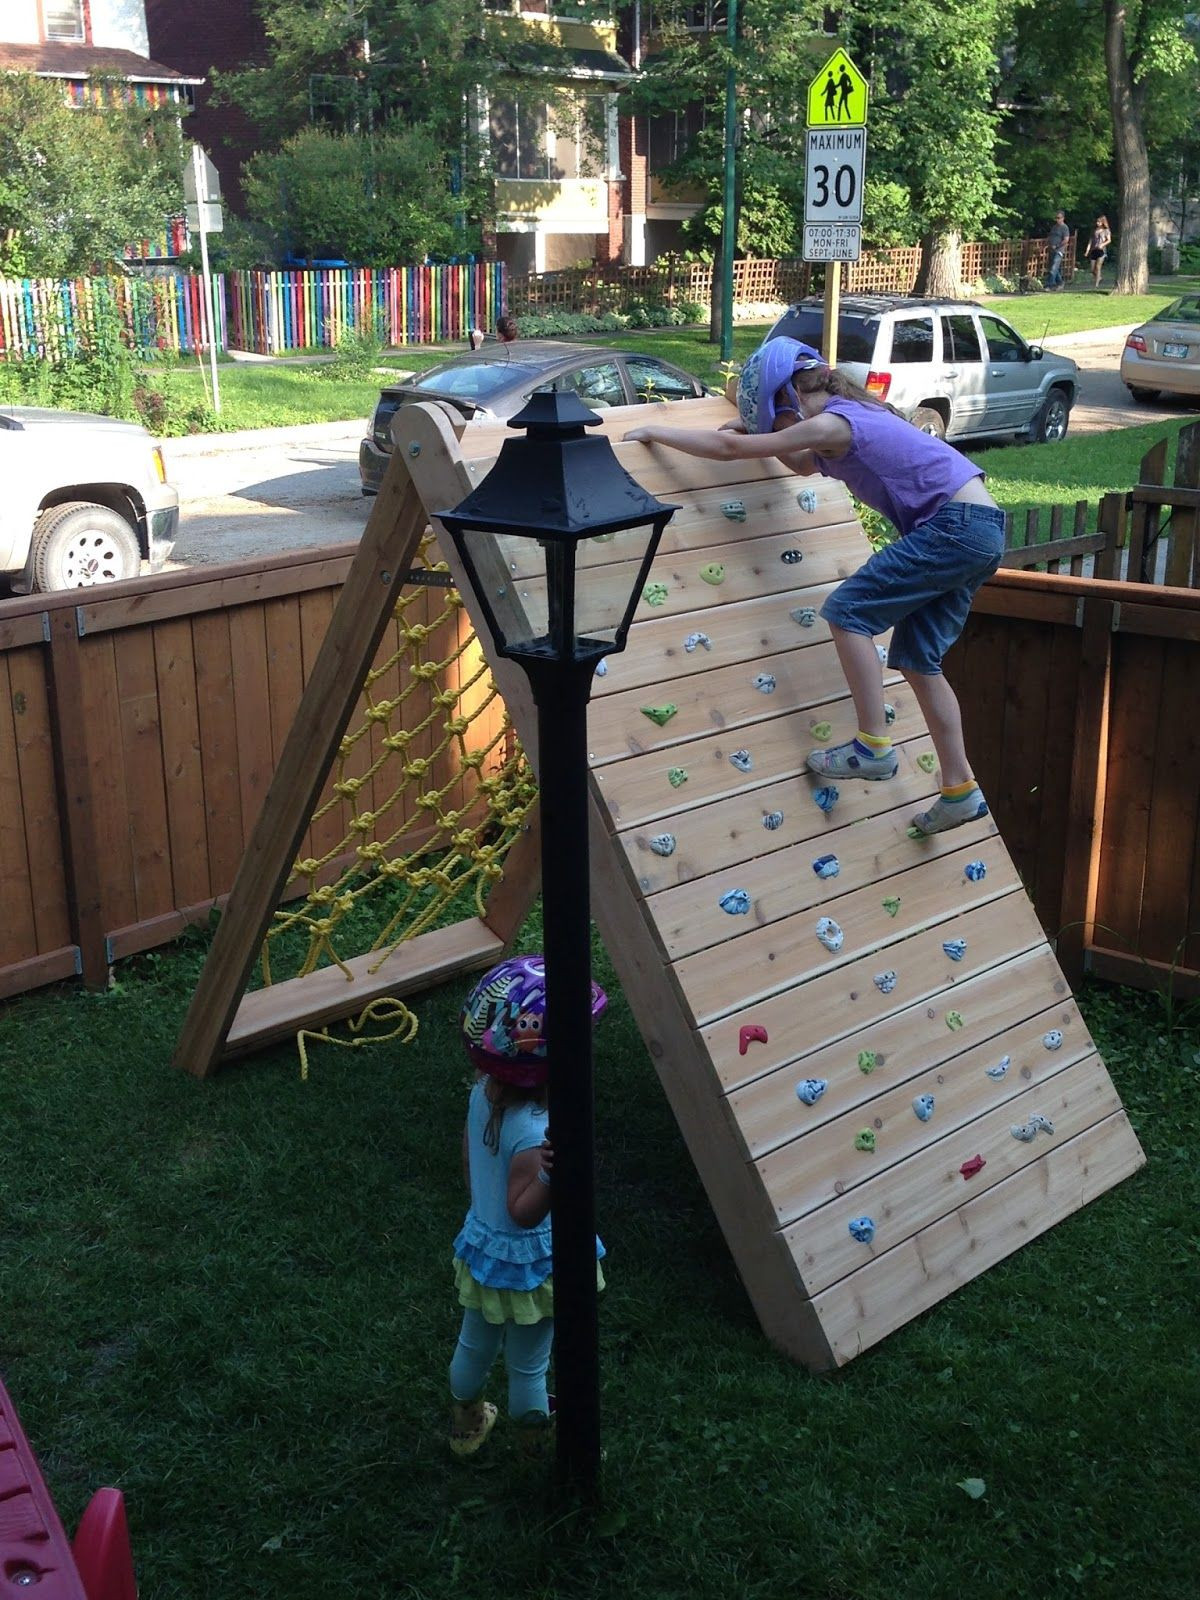 DIY Outdoor Rock Climbing Wall
 The Best Backyard DIY Projects for Your Outdoor Play Space